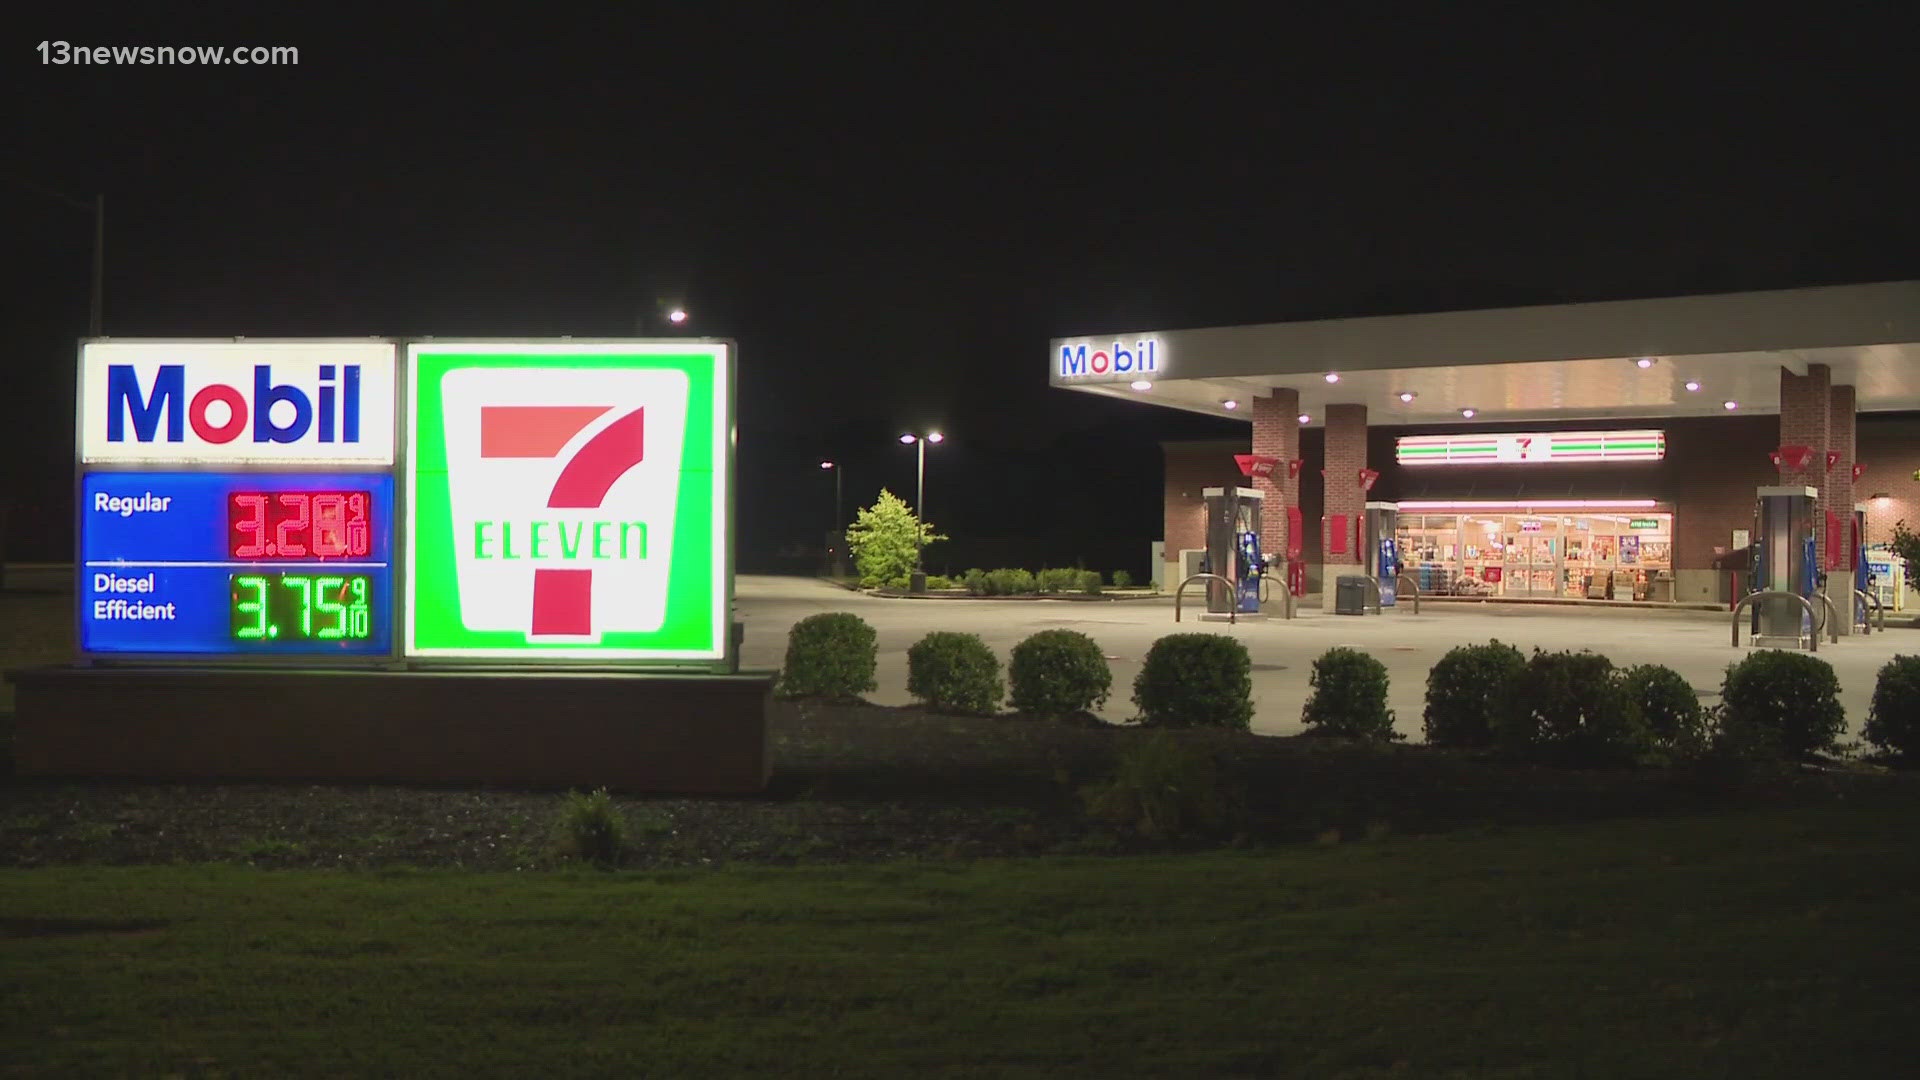 A Newport News man is speaking out after he accidentally shot himself during an argument outside the 7-Eleven where he works.